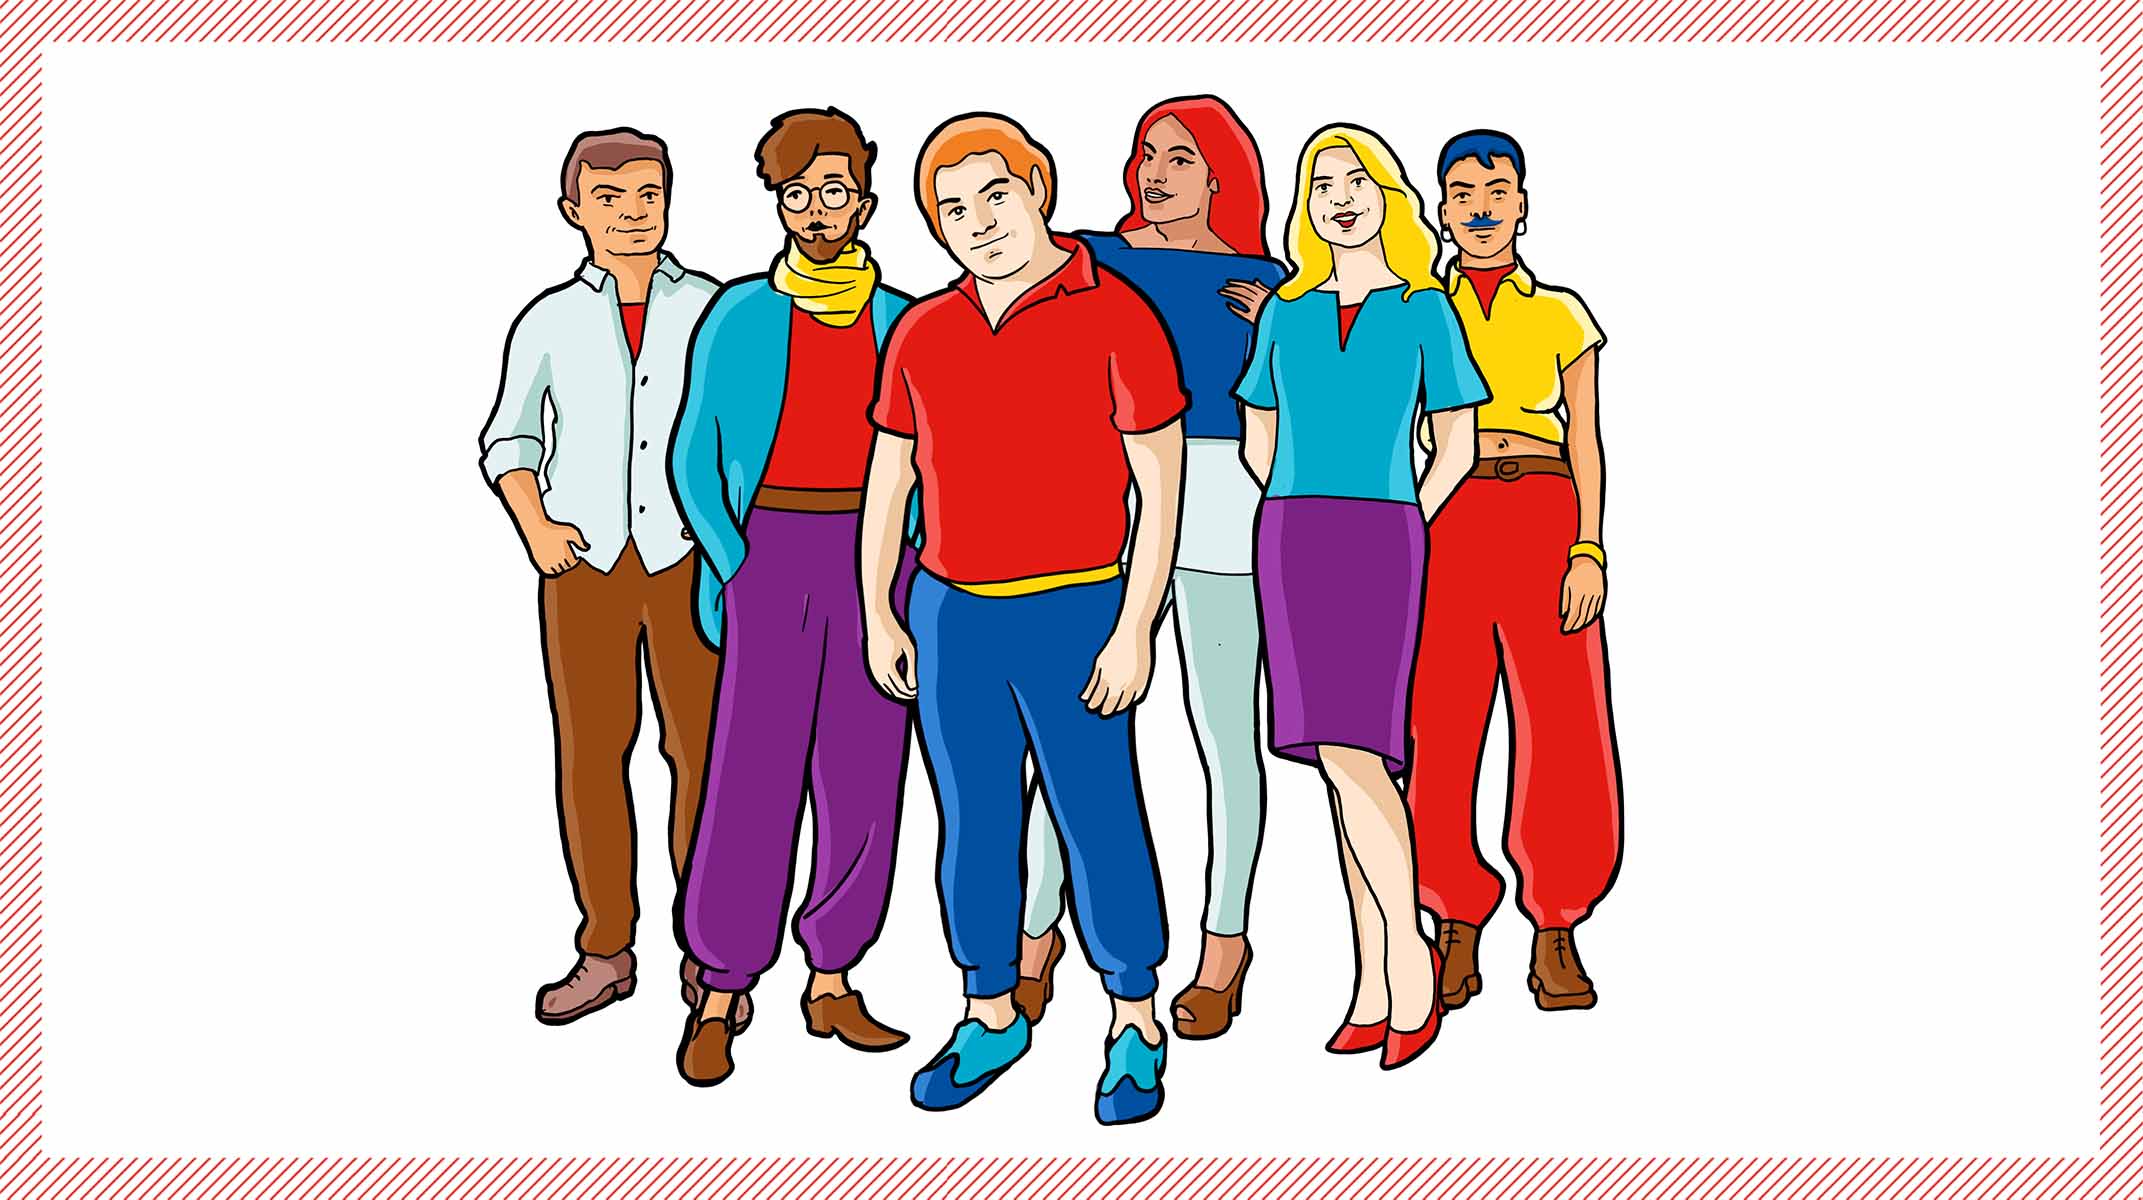 A colorful illustration of six standing people with different genders, different skin colors and various hair colors.